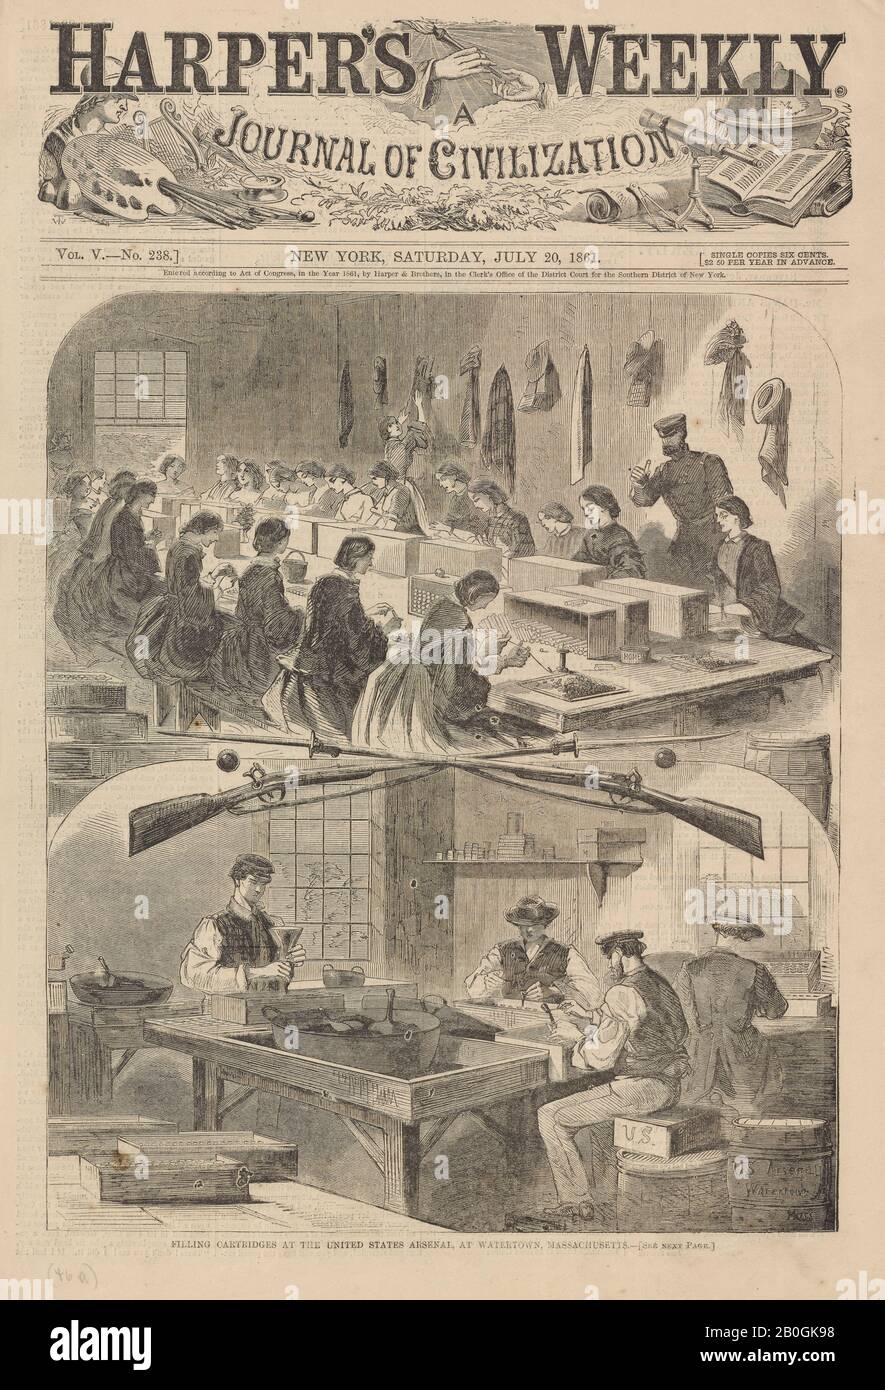 After Winslow Homer, American, 1836–1910, Filling Cartridges at the United States Arsenal, at Watertown, Massachusetts, From Harper's Weekly, vol. 5, 20 July 1861, Wood engraving on newsprint, Image: 10 7/8 x 9 1/8 in. (27.6 x 23.2 cm Stock Photo